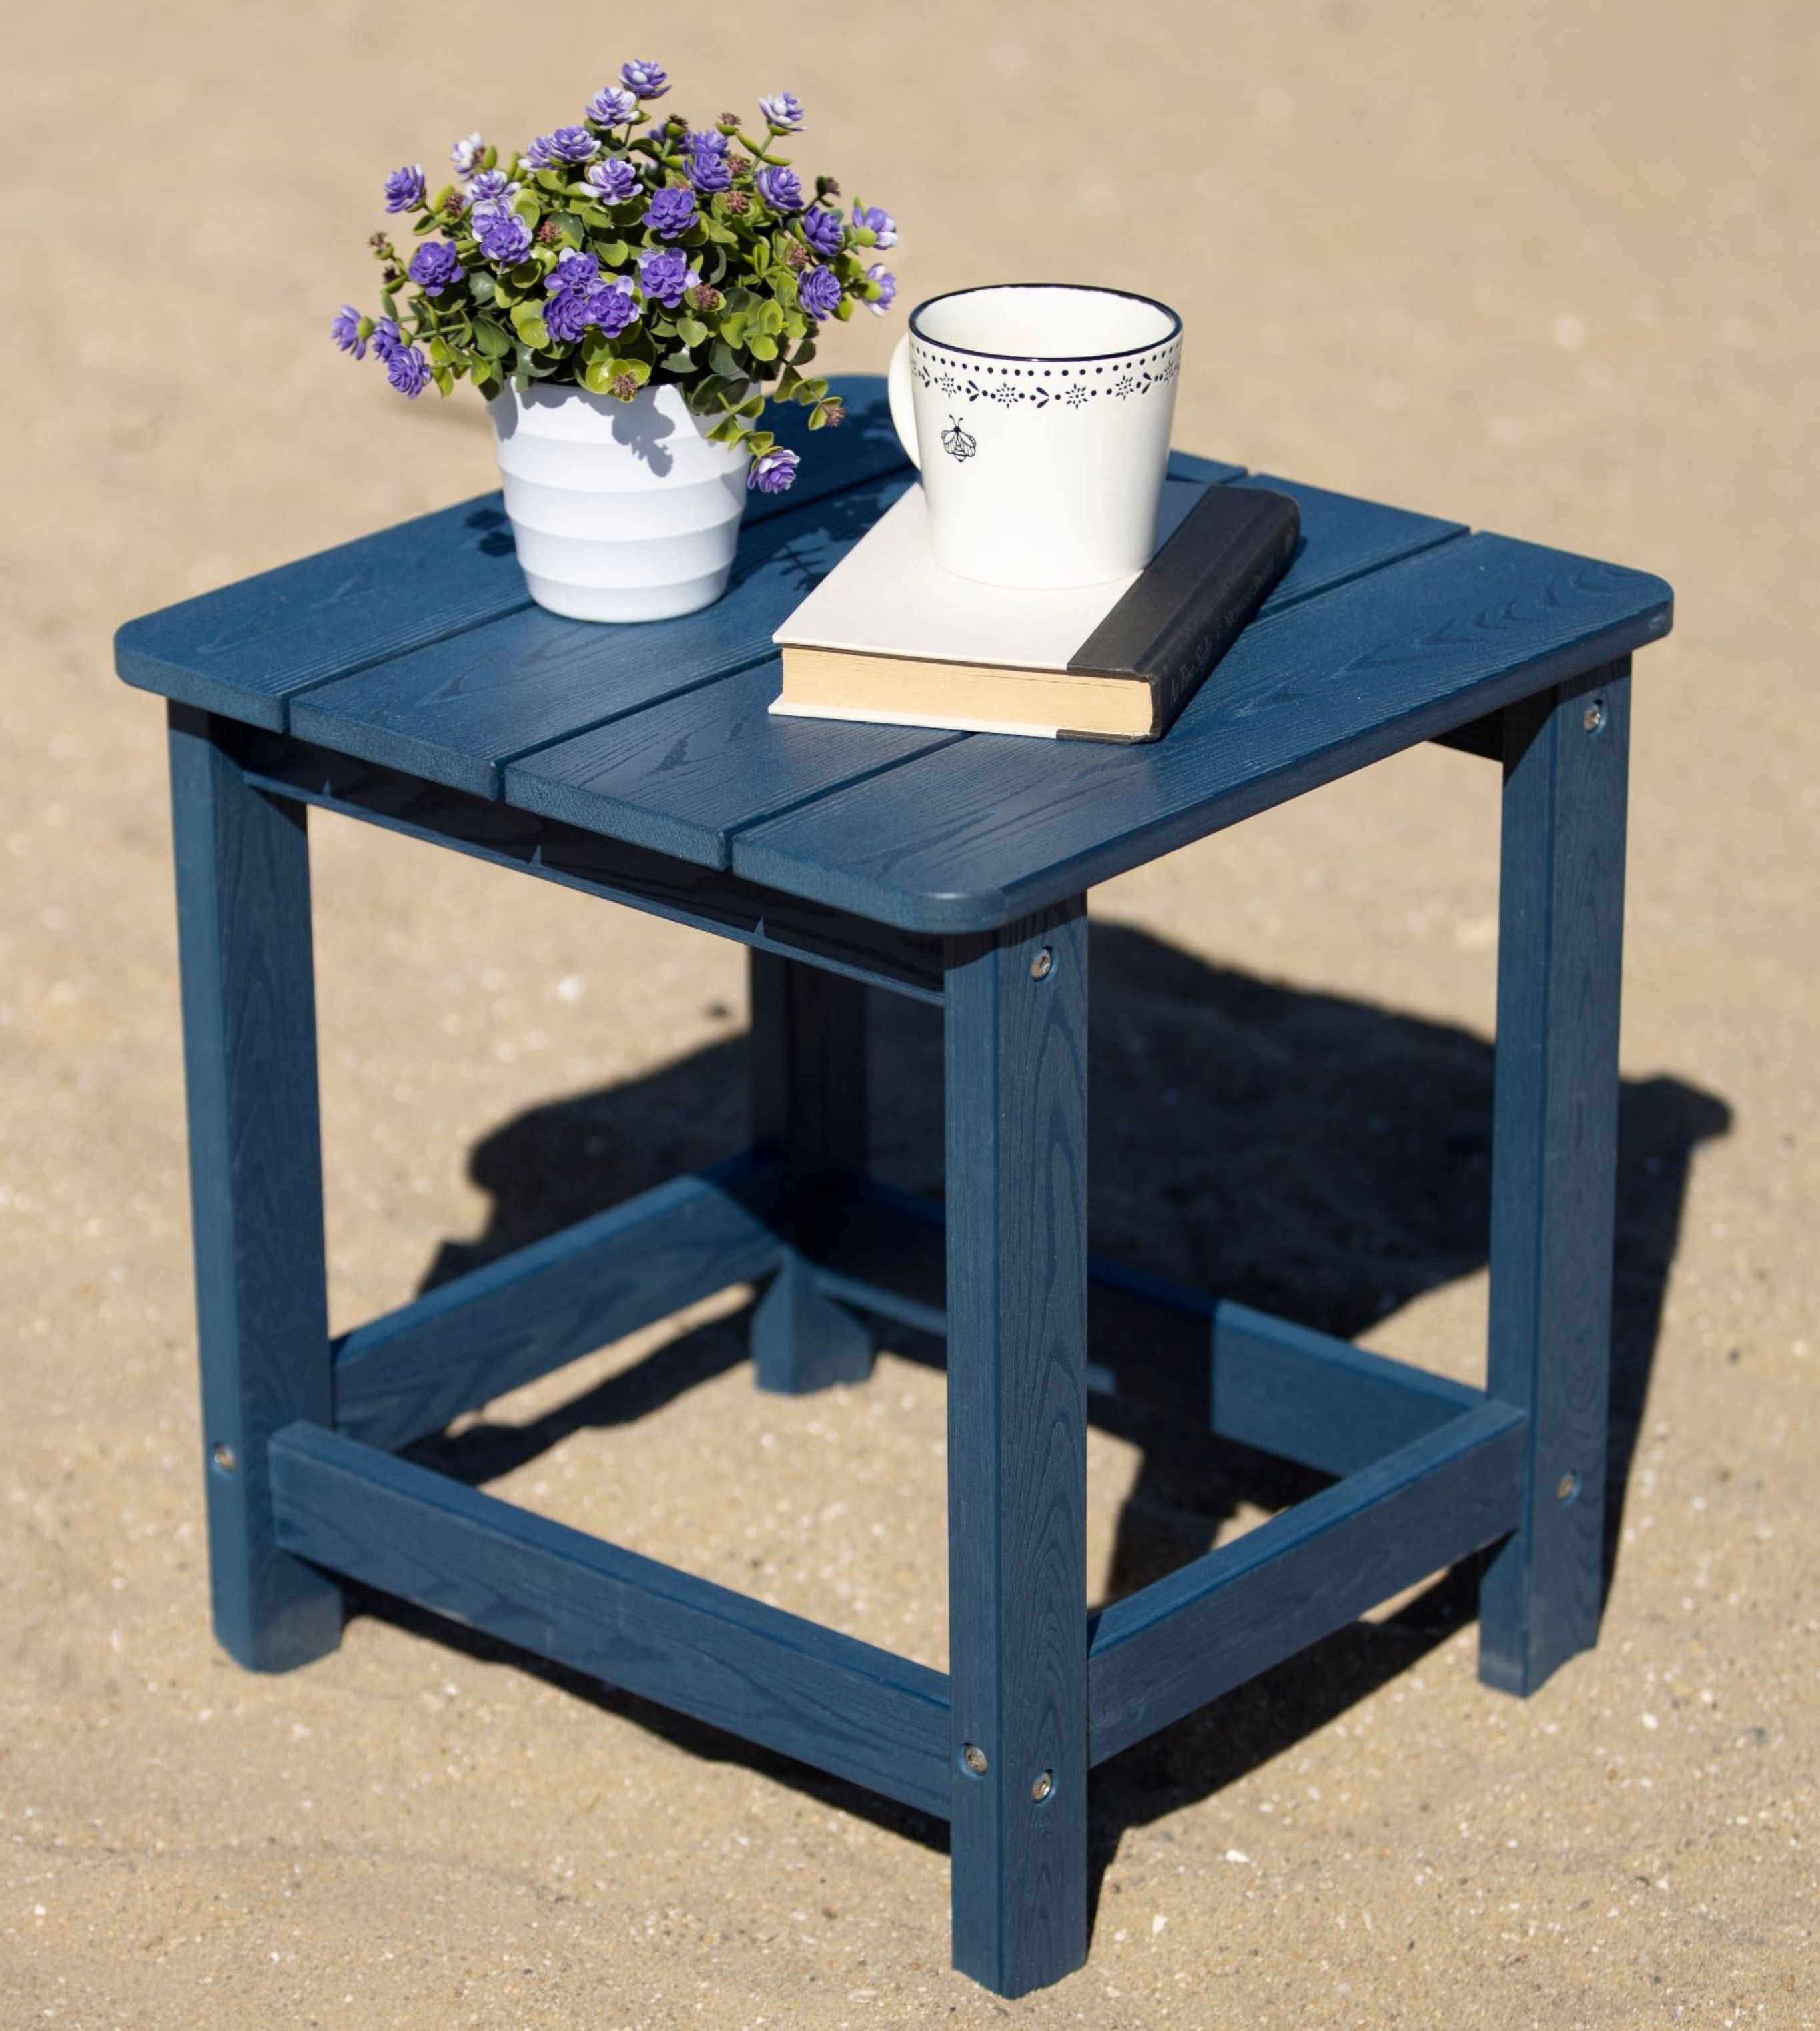 All Weather Indoor-Outdoor Side Table, Navy - image 3 of 7